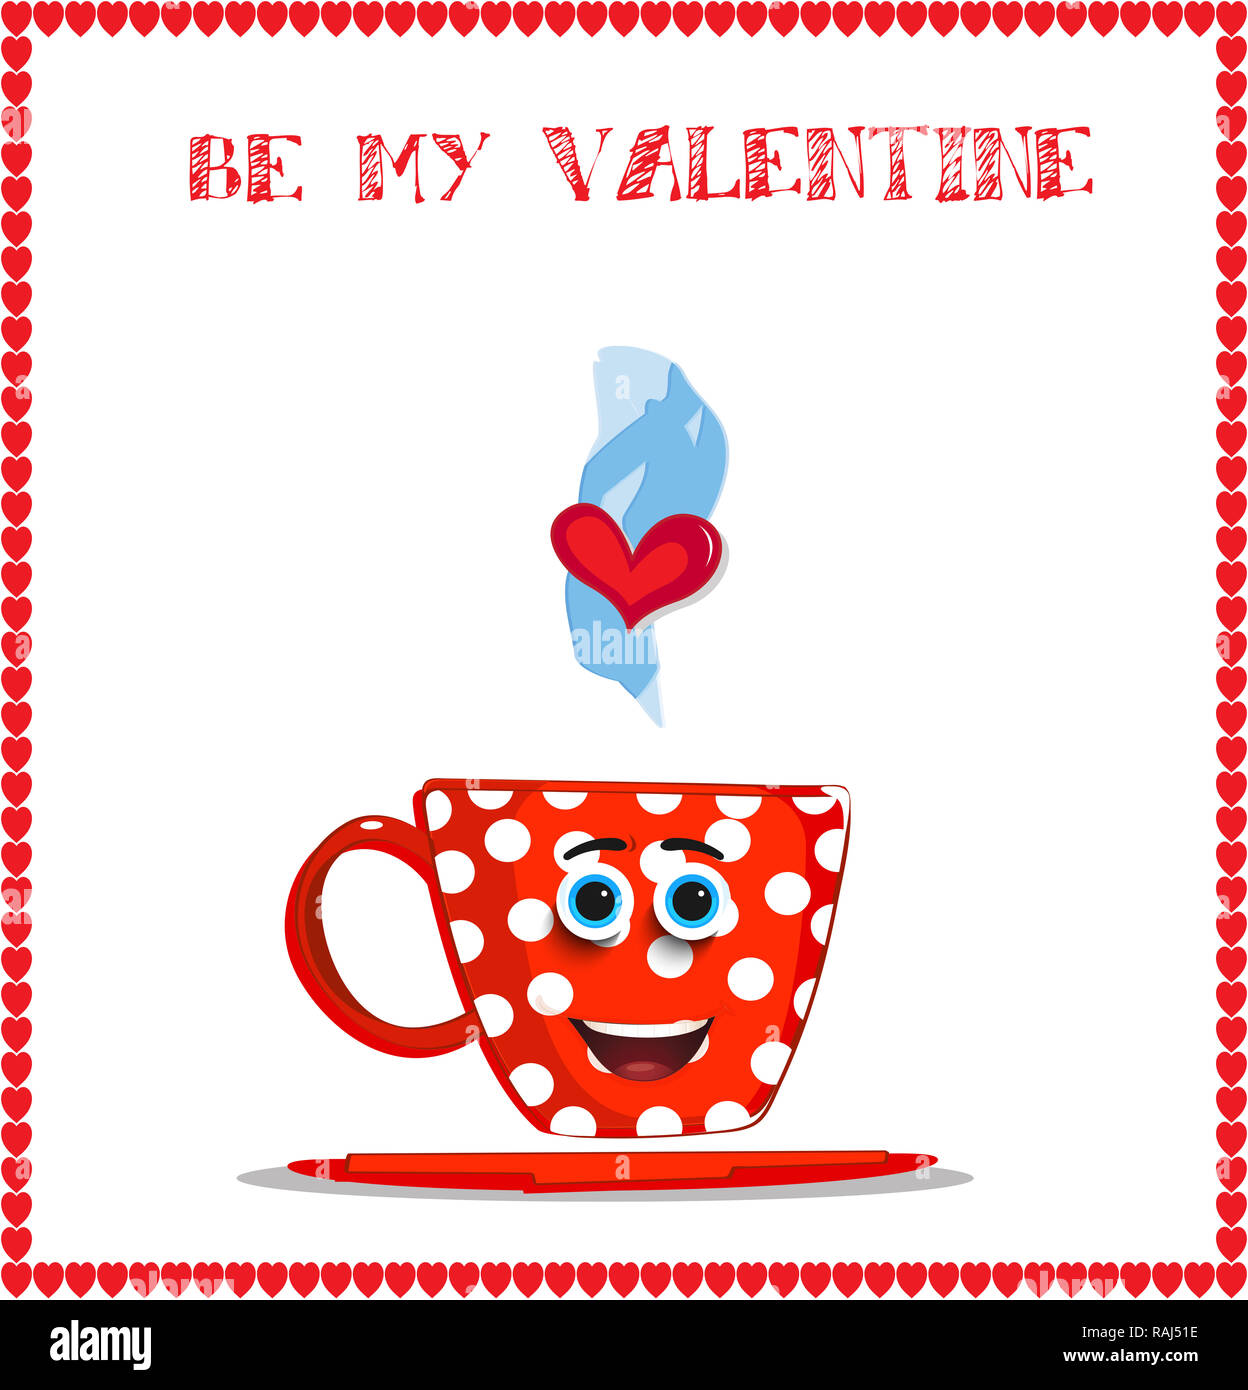 https://c8.alamy.com/comp/RAJ51E/be-my-valentine-card-with-cute-smiling-red-mug-with-white-polka-dots-pattern-framed-with-hearts-border-illustration-love-clip-art-greeting-card-RAJ51E.jpg